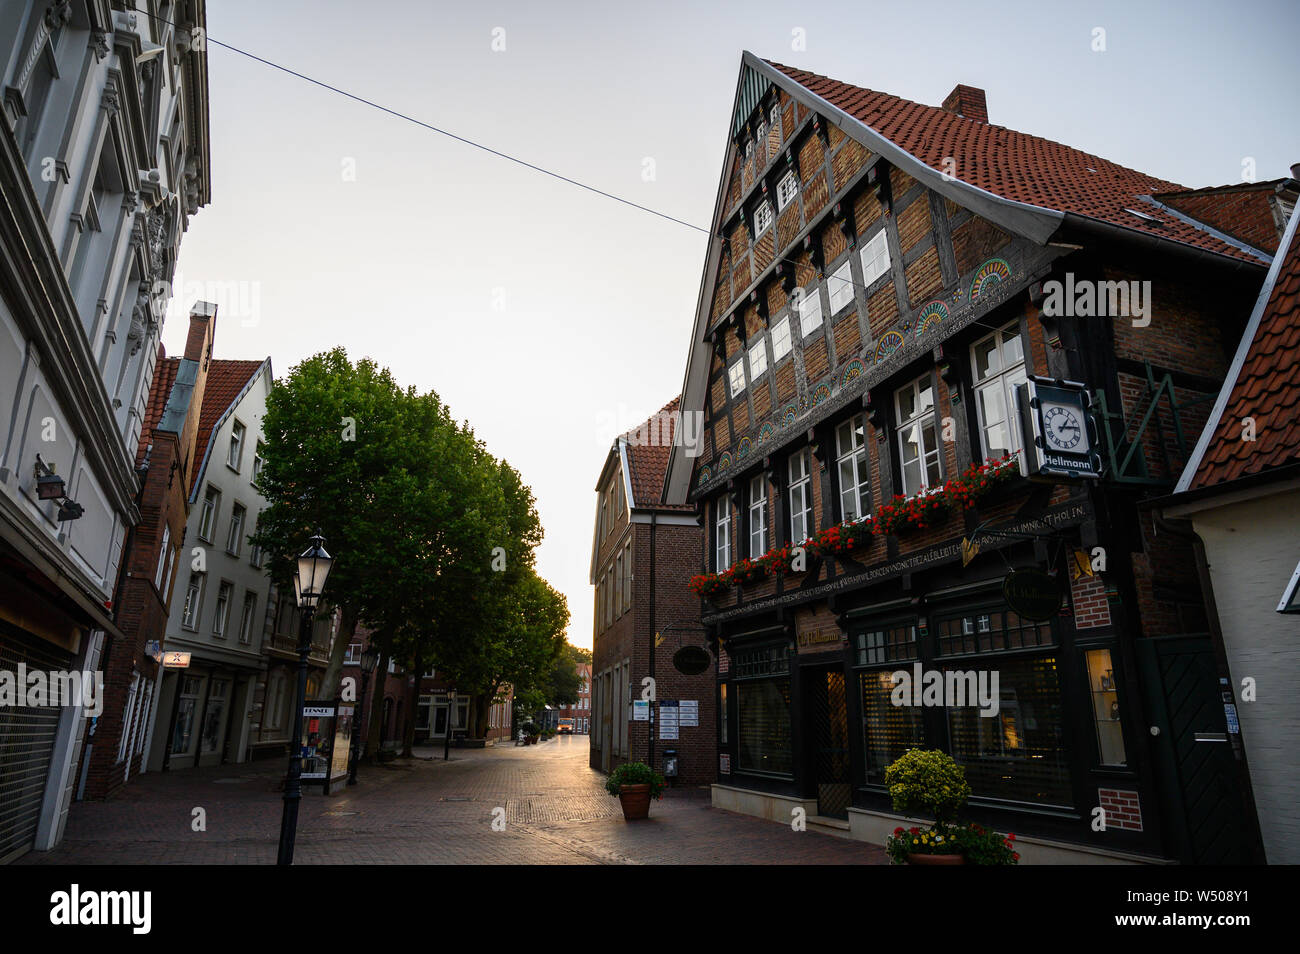 Lingen, Germany. 26th July, 2019. The rising sun shines through a street  with a half-timbered house. Lingen in Lower Saxony was the hottest place in  Germany on 25.07.2019 with 42.6 degrees according